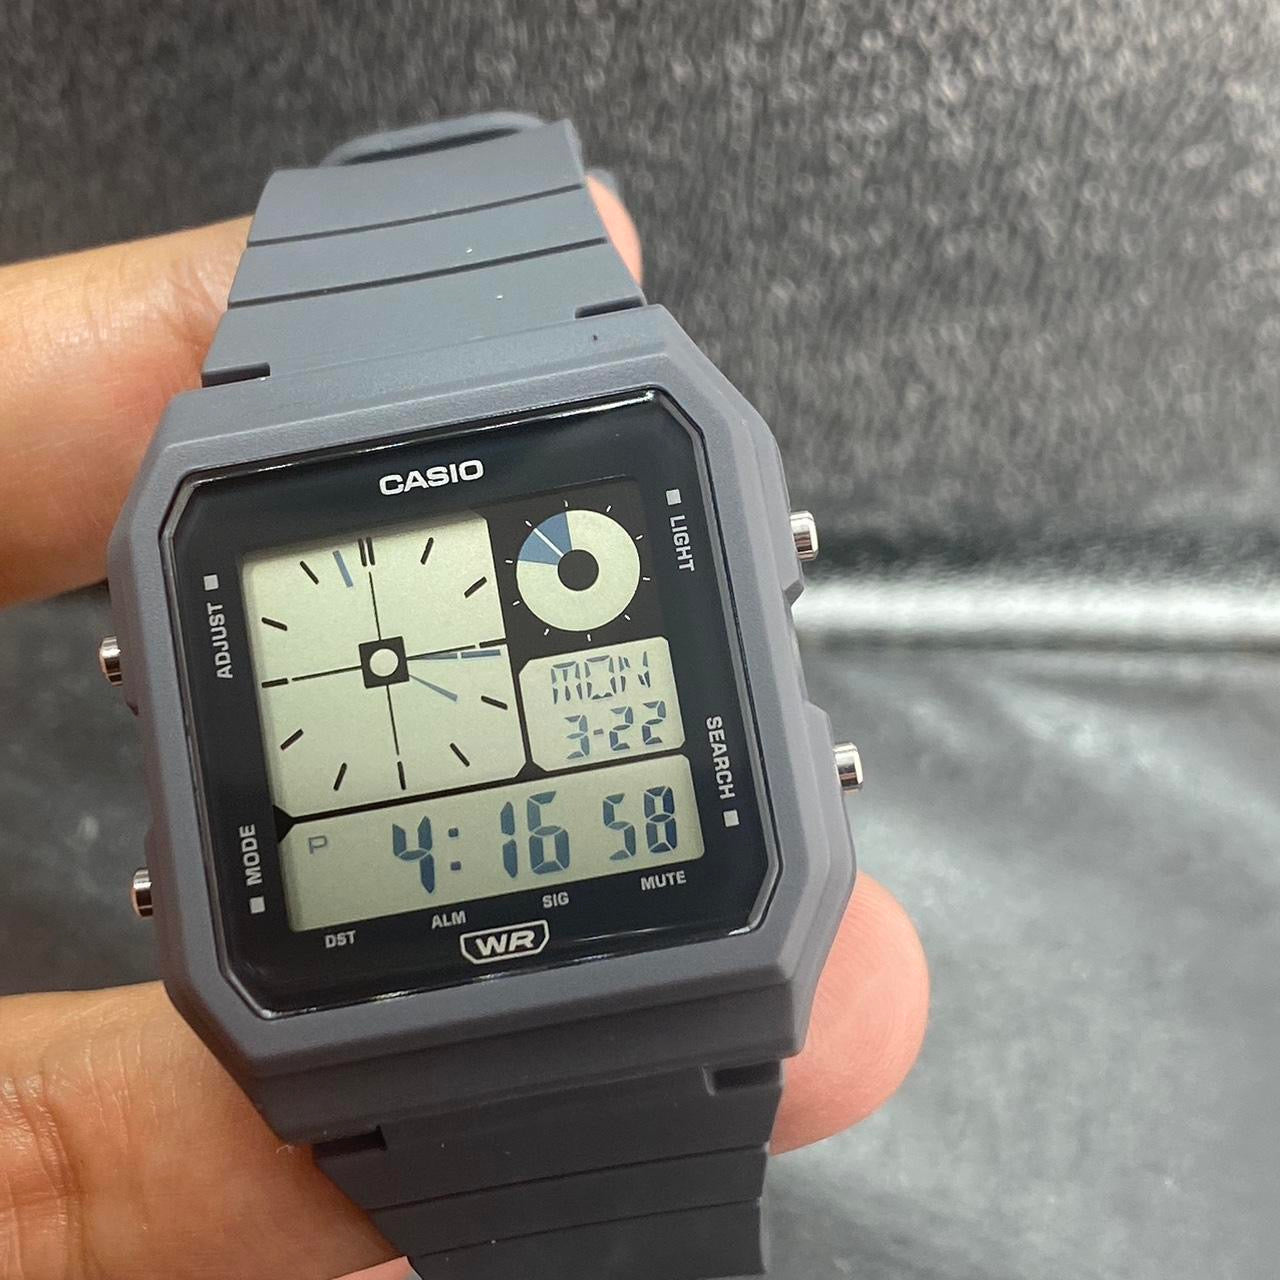 CASIO SPORTS WATCH&nbsp; FOR UNISEX SIZE , FOR MEN, LADIES&nbsp; OR FOR TEEN&nbsp;  34 MM DIAMETER CASUAL WORK OR DAILY WATCH&nbsp;  BRAND NEW ITEM&nbsp;  9 INCHES ROUND LONG&nbsp;  NEW ITEM , NEW BATTERY , LIGHT, TIMER, STOP WATCH&nbsp;